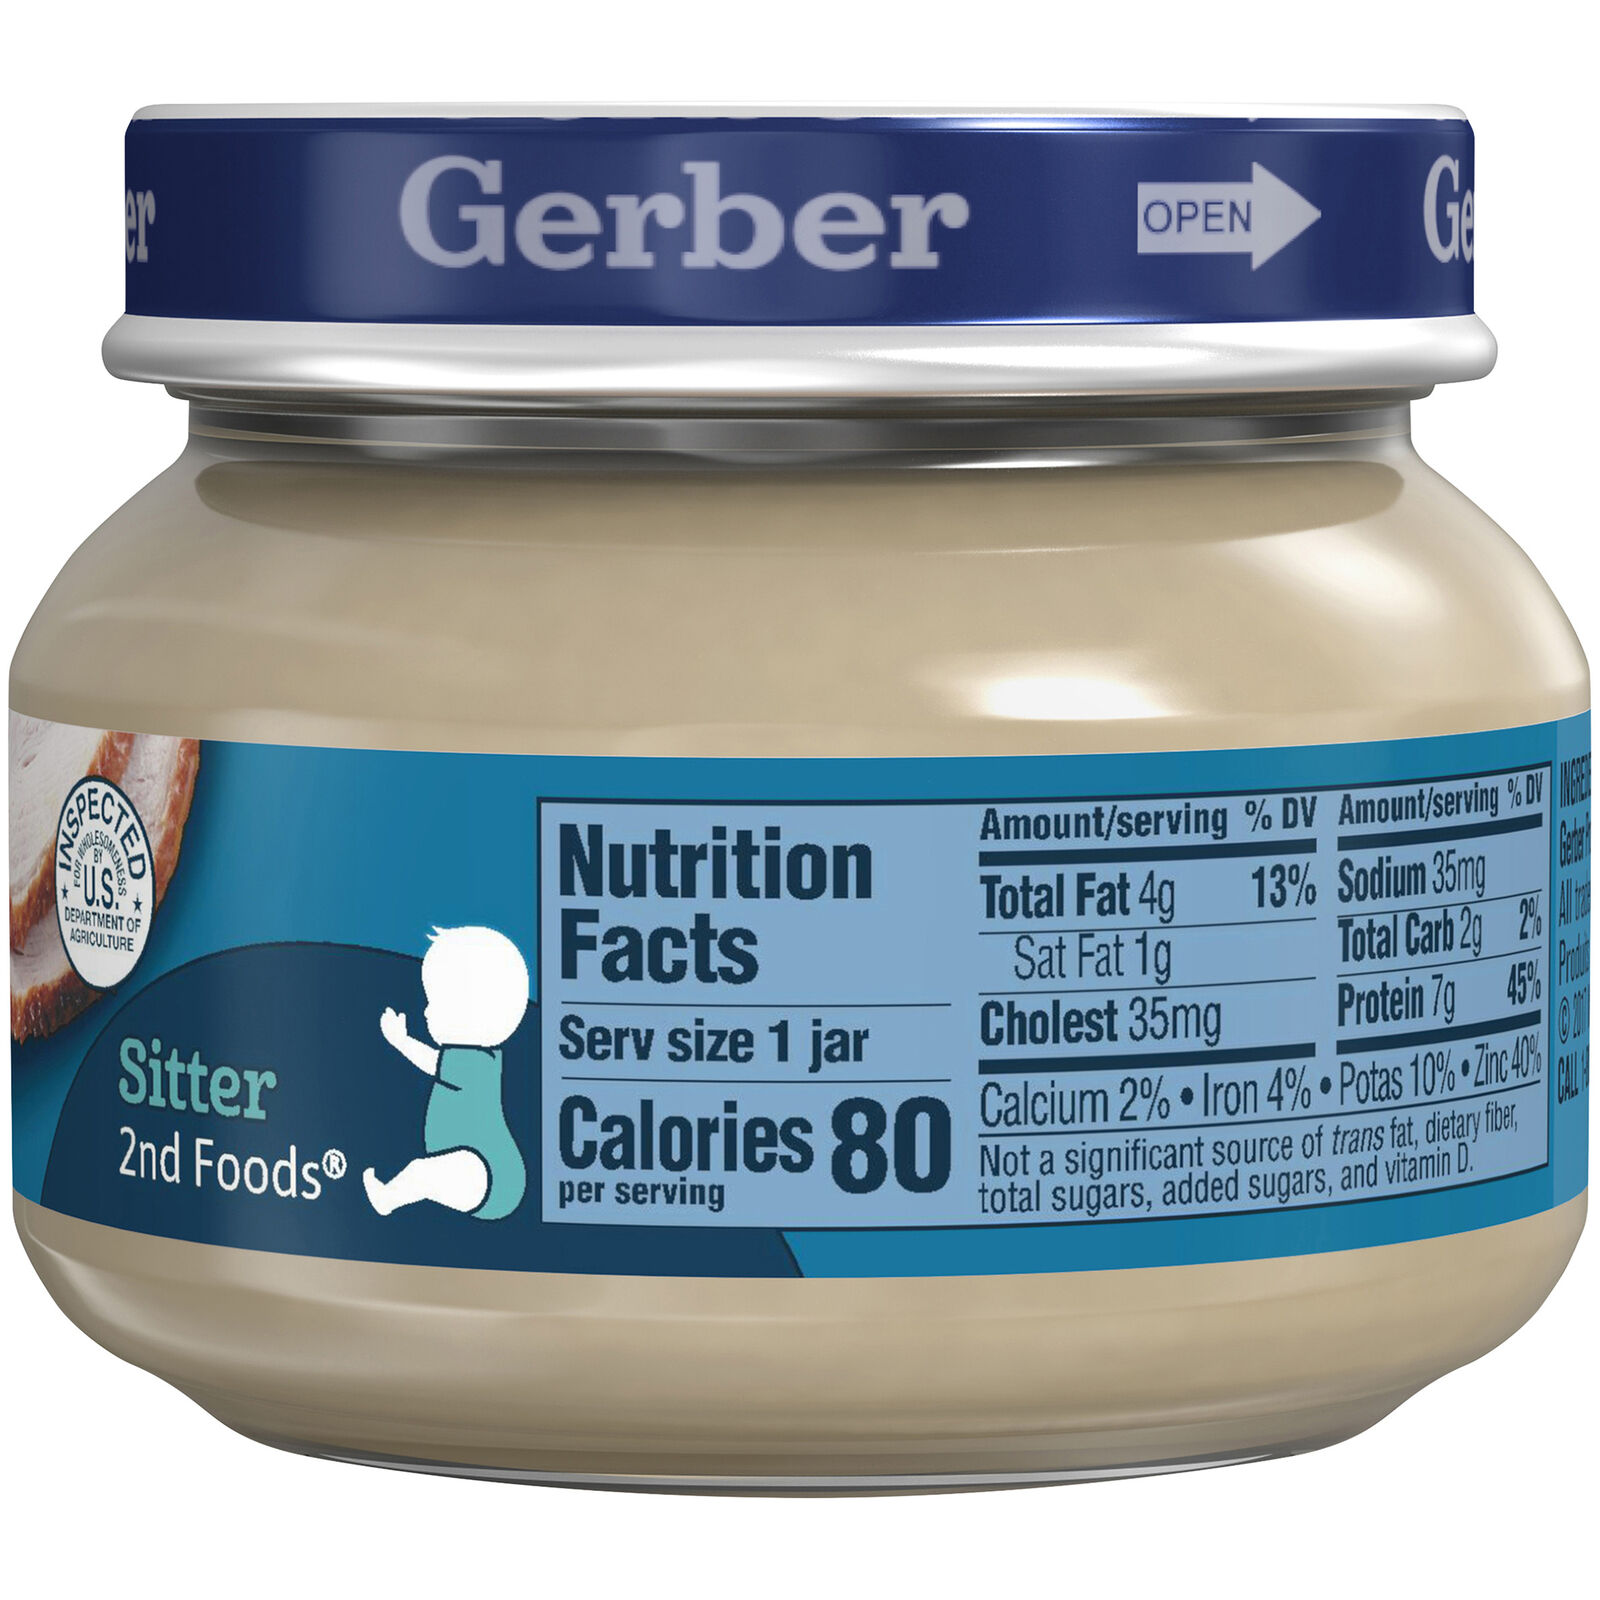 Gerber 2nd Foods Baby Food Jars Turkey and Gravy Non GMO – 2.5 Oz – Pack of 20 Gerber Does not apply - фотография #2